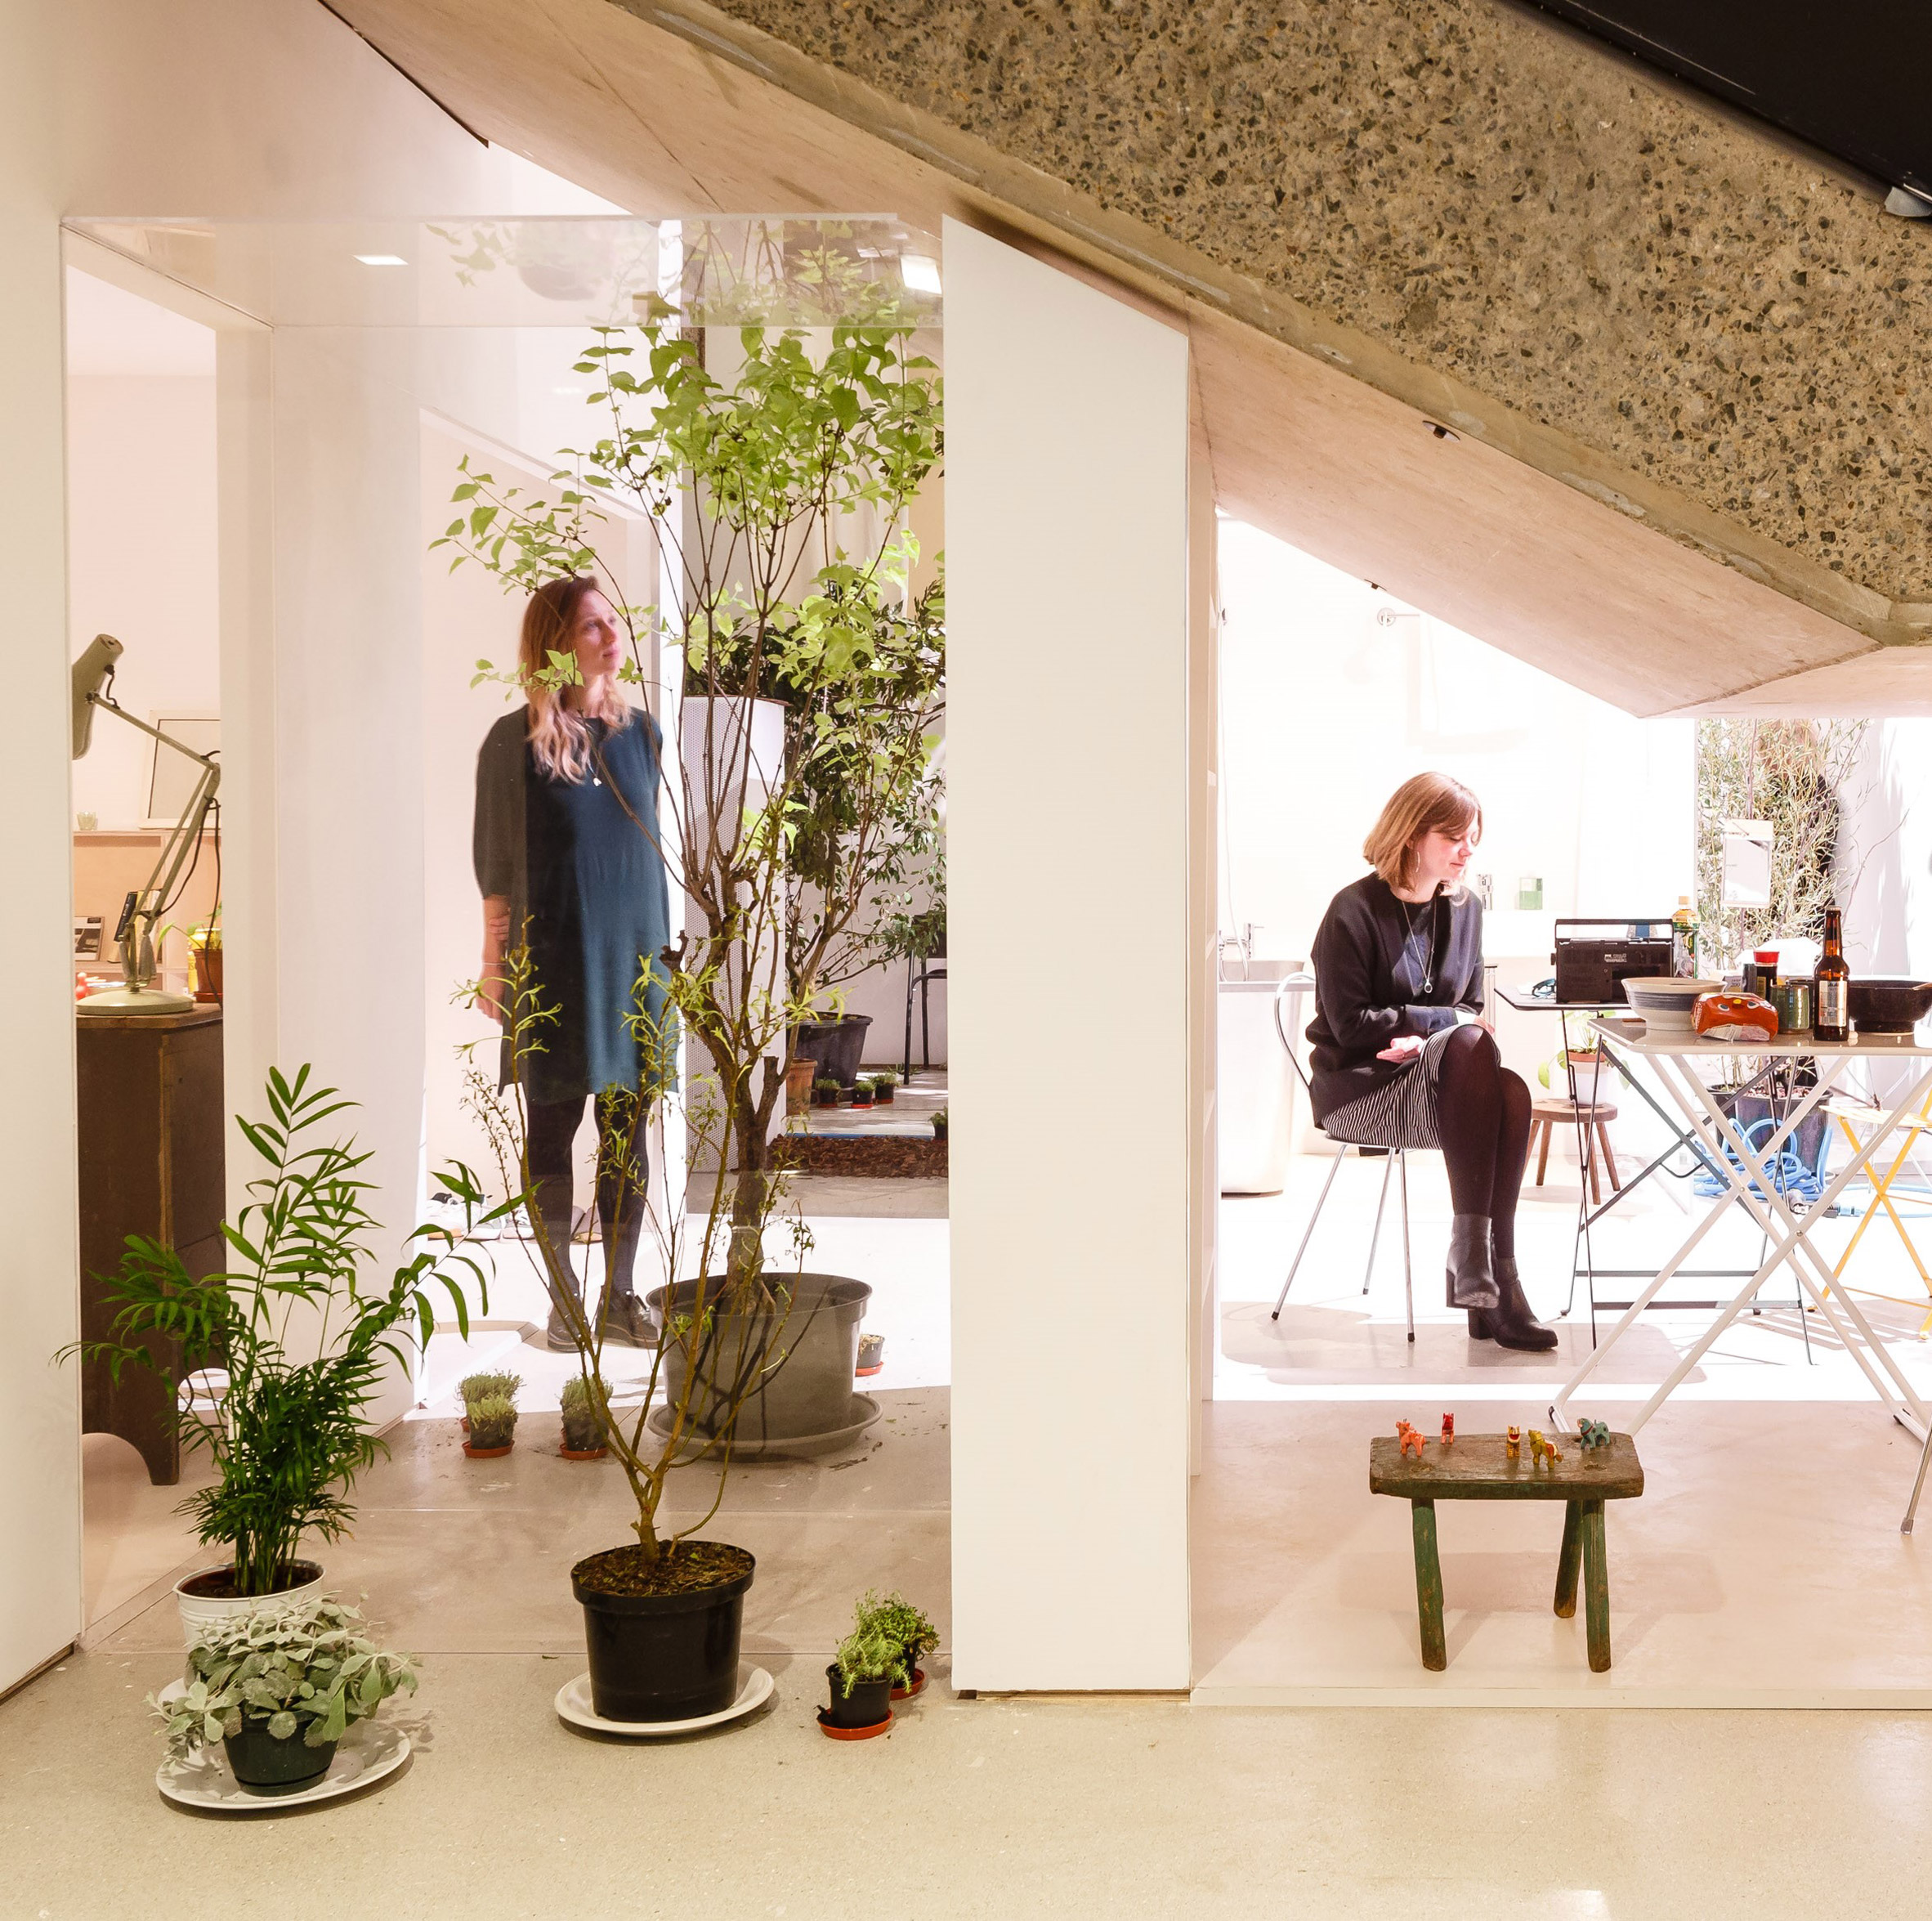 Japanese housing exhibition occupies scale model of SANAA-designed house at London's Barbican-5